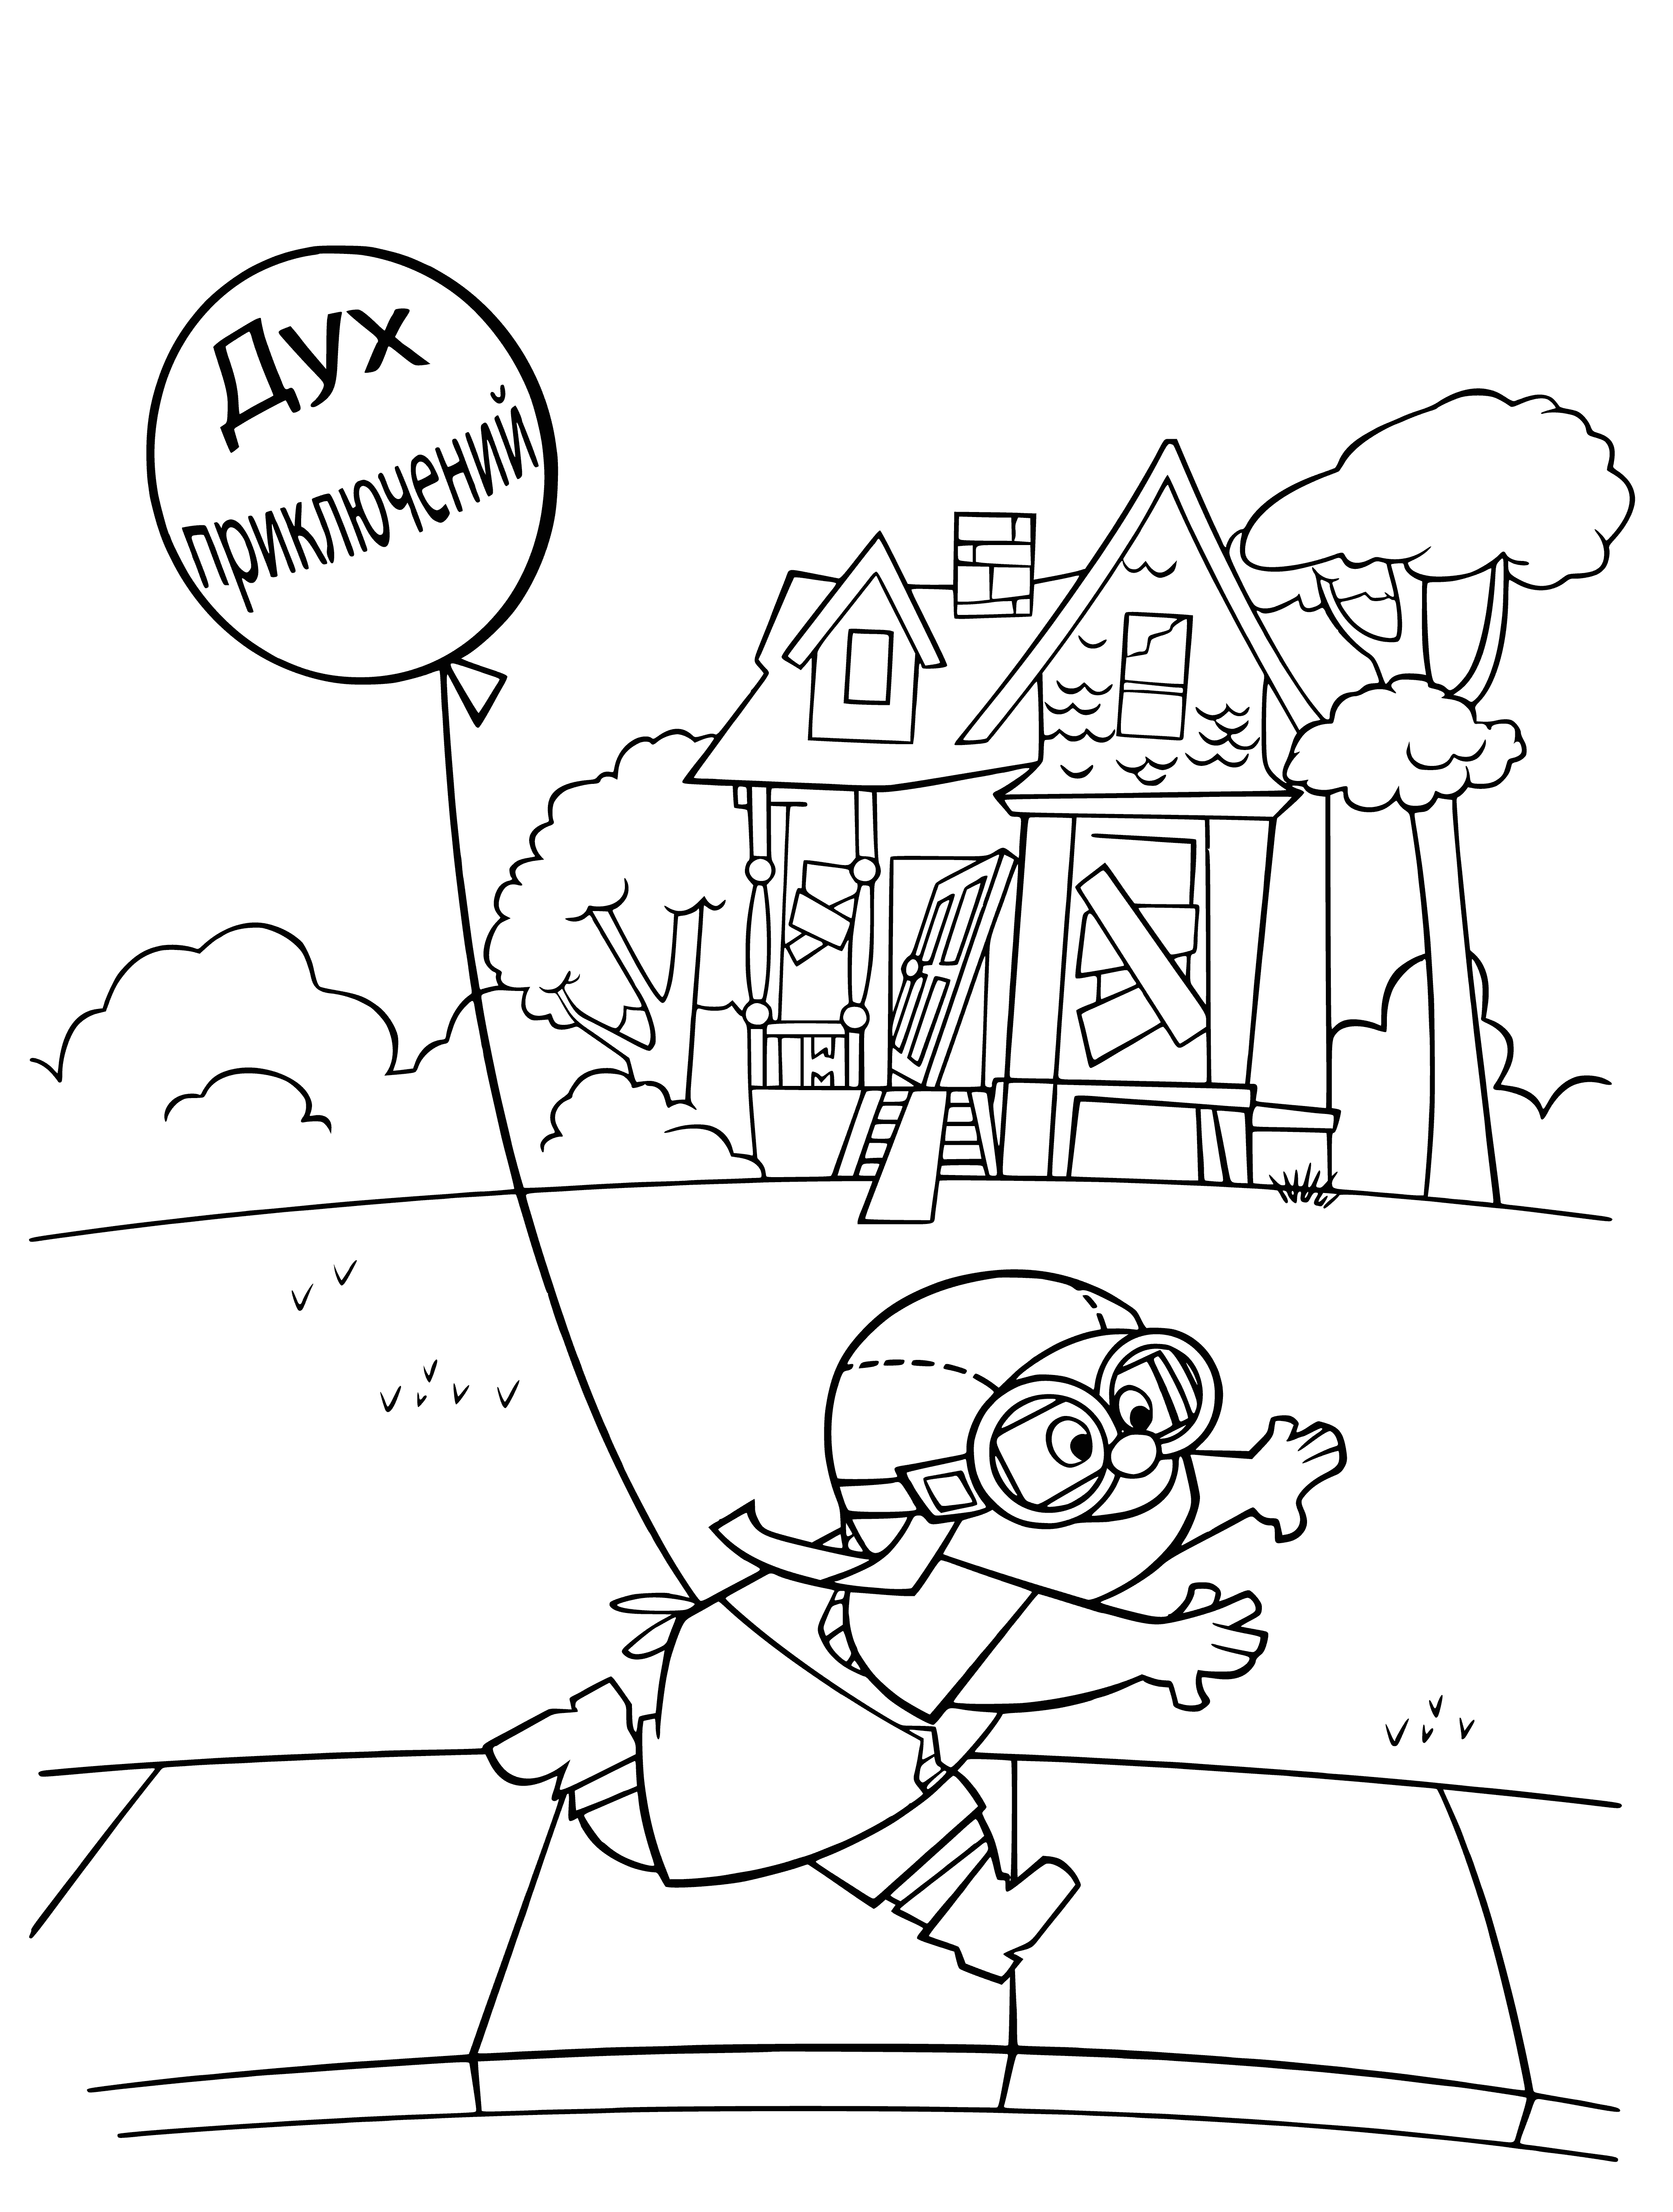 coloring page: Karl smiles looking at a ball.